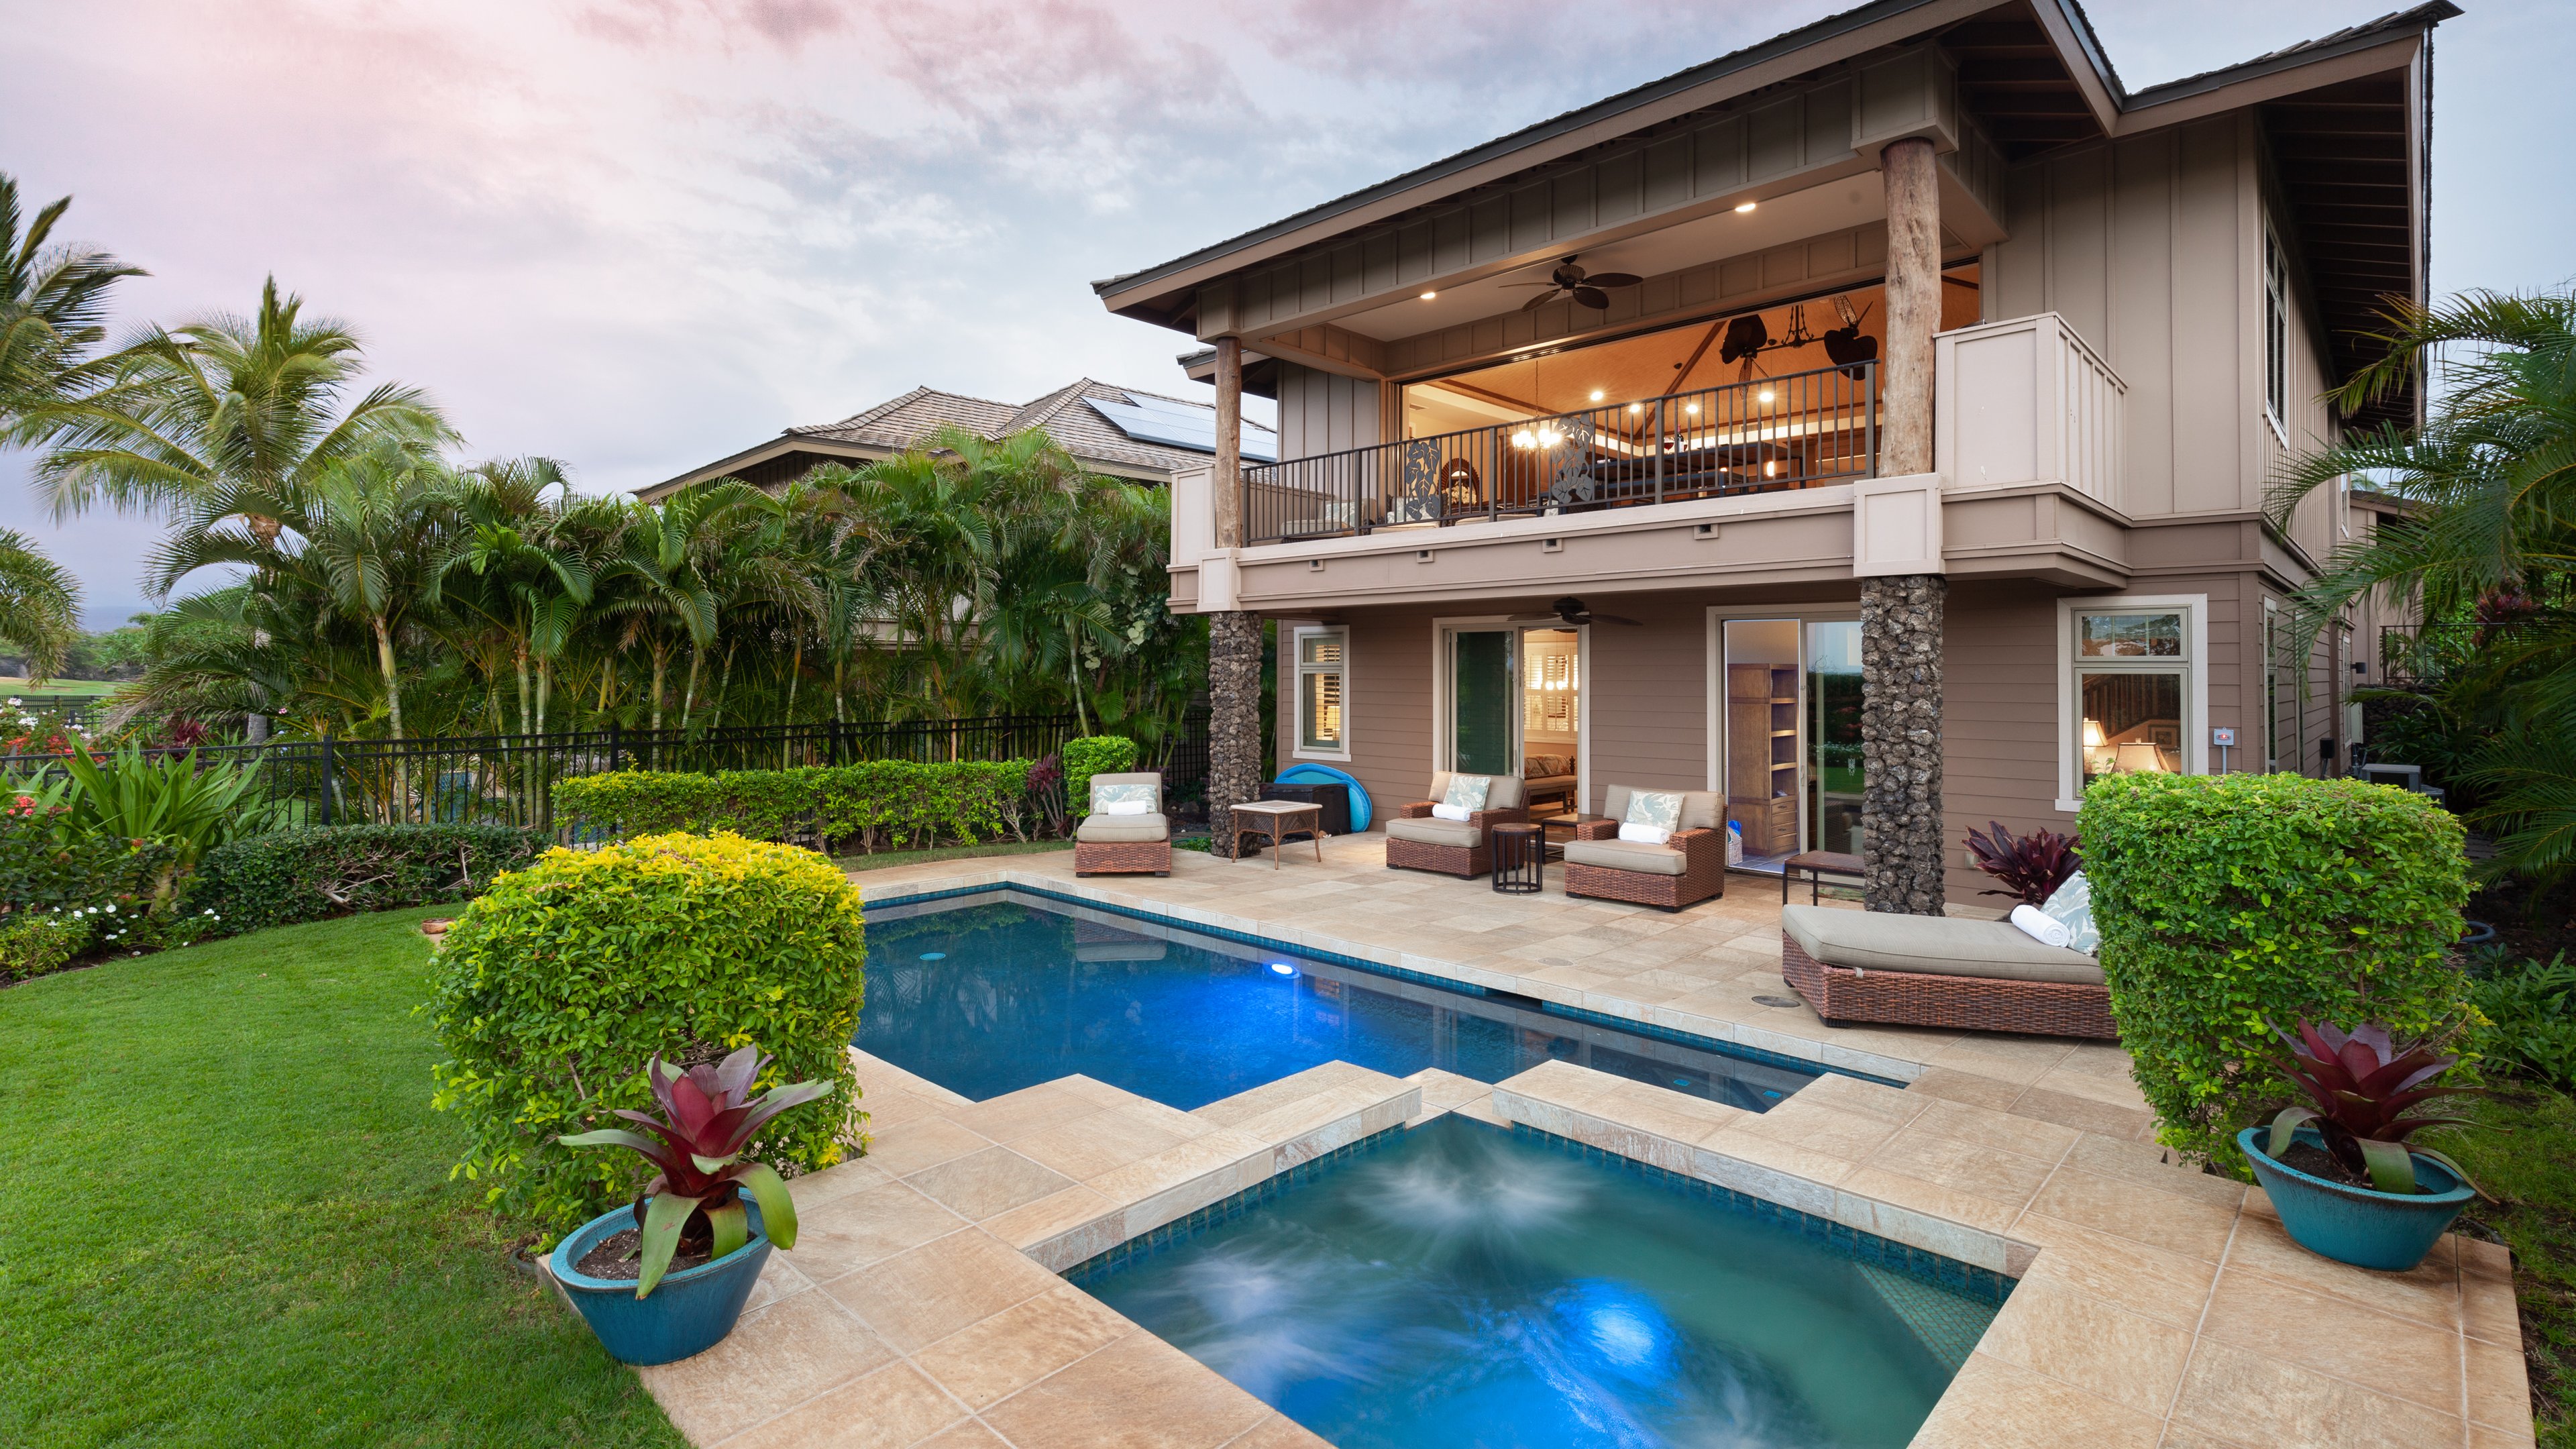 Welcome to Lotus Pad - beautiful home with private pool and spa